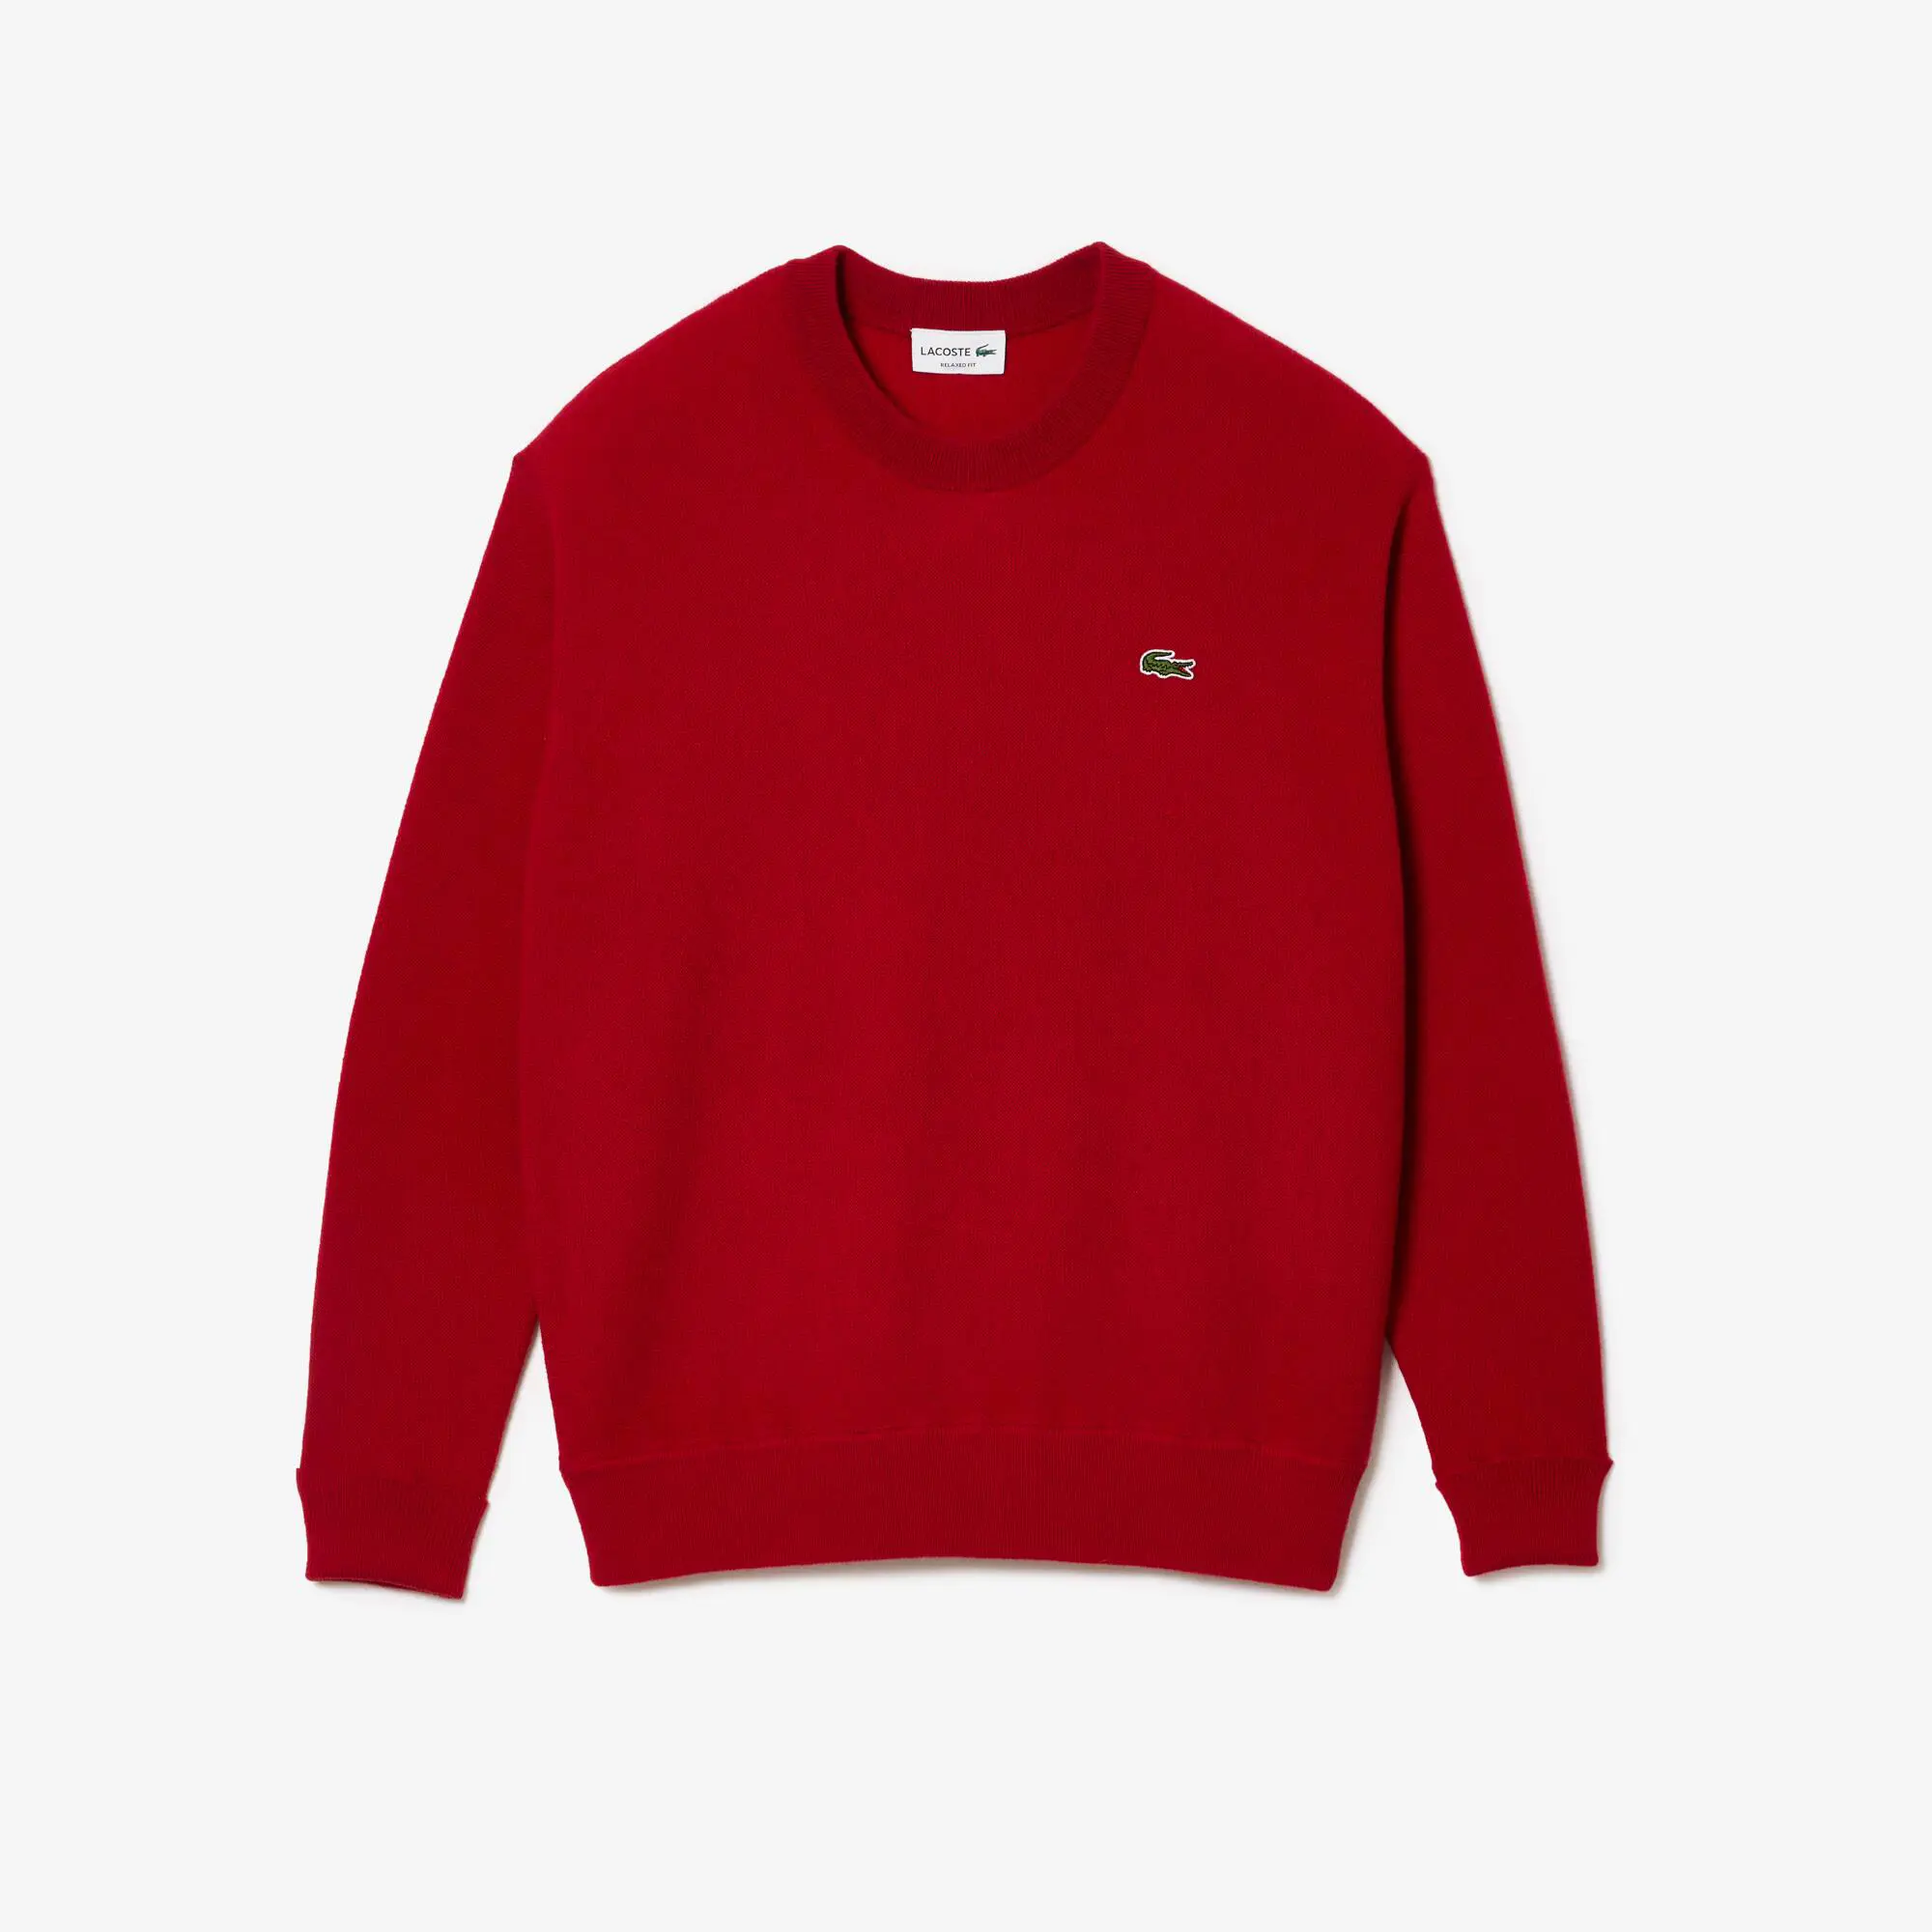 Lacoste Men's Lacoste Relaxed Fit Crew Neck Wool Sweater. 2